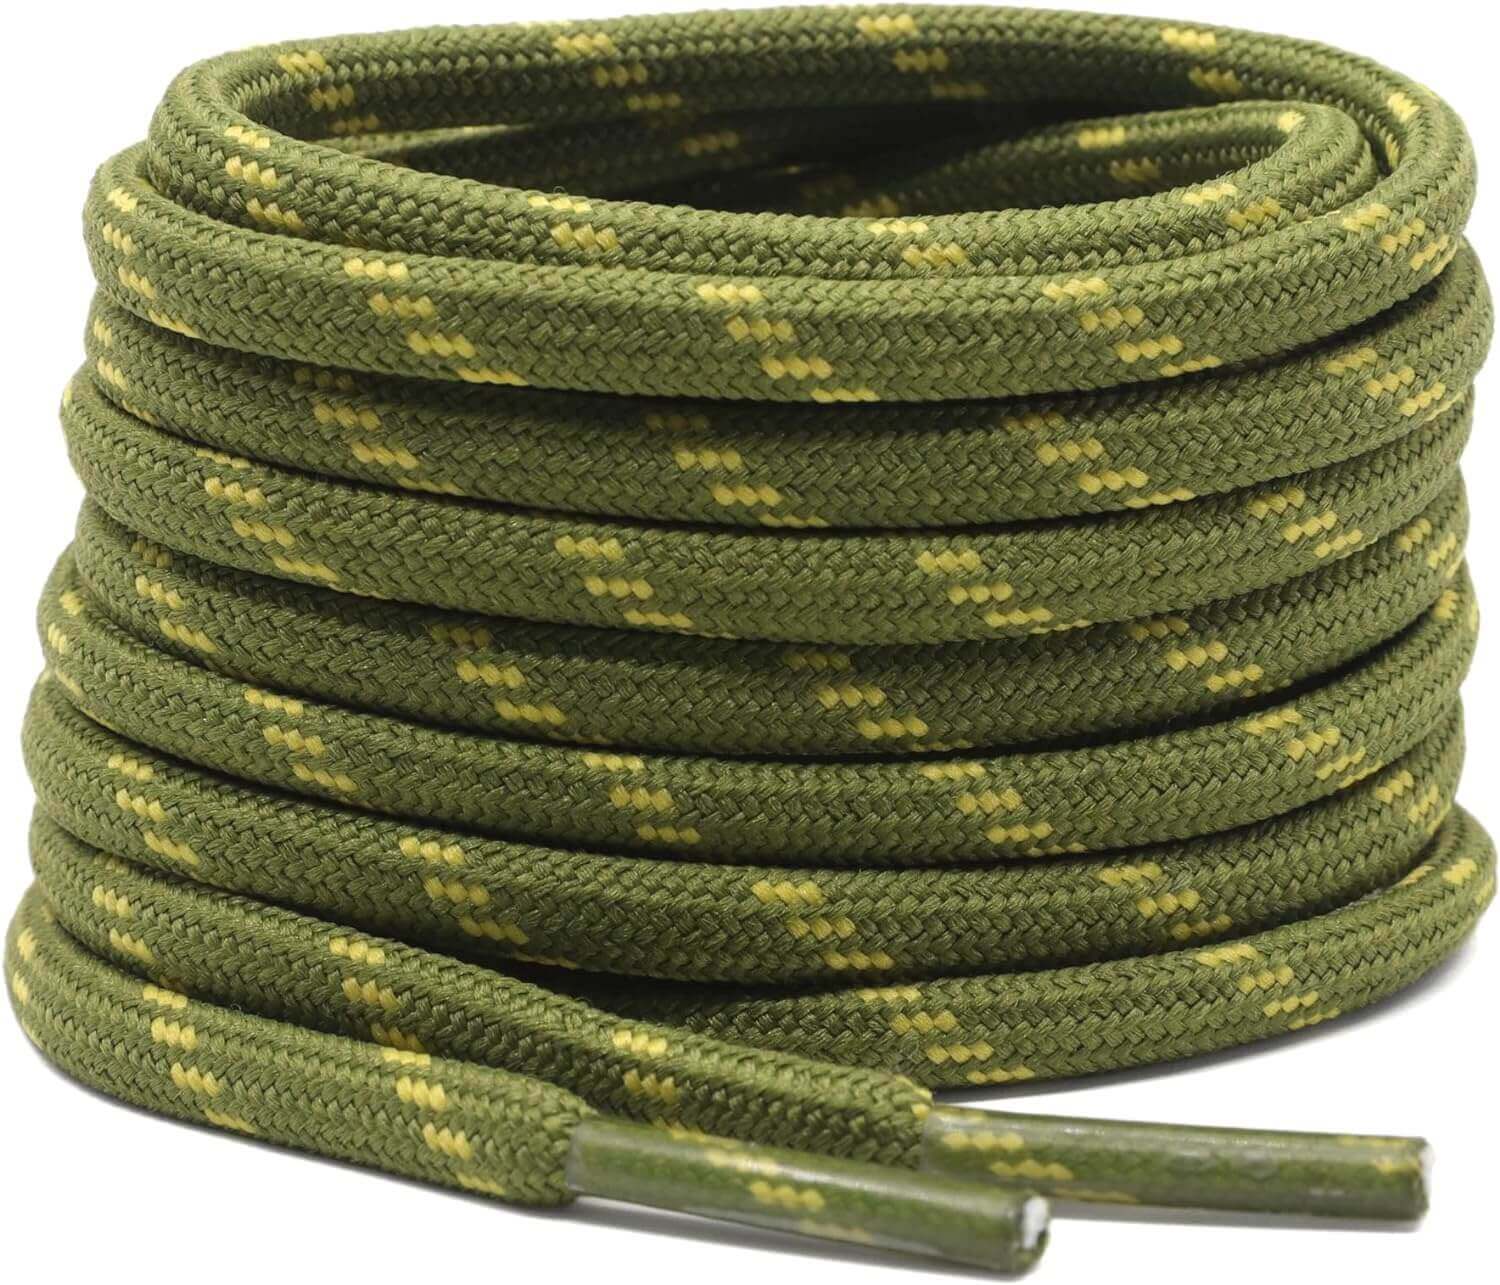 Shop The Latest >2 Pair Work Boot Laces - Hiking, Walking, Shoelaces > *Only $12.14*> From The Top Brand > *DELELEl* > Shop Now and Get Free Shipping On Orders Over $45.00 >*Shop Earth Foot*